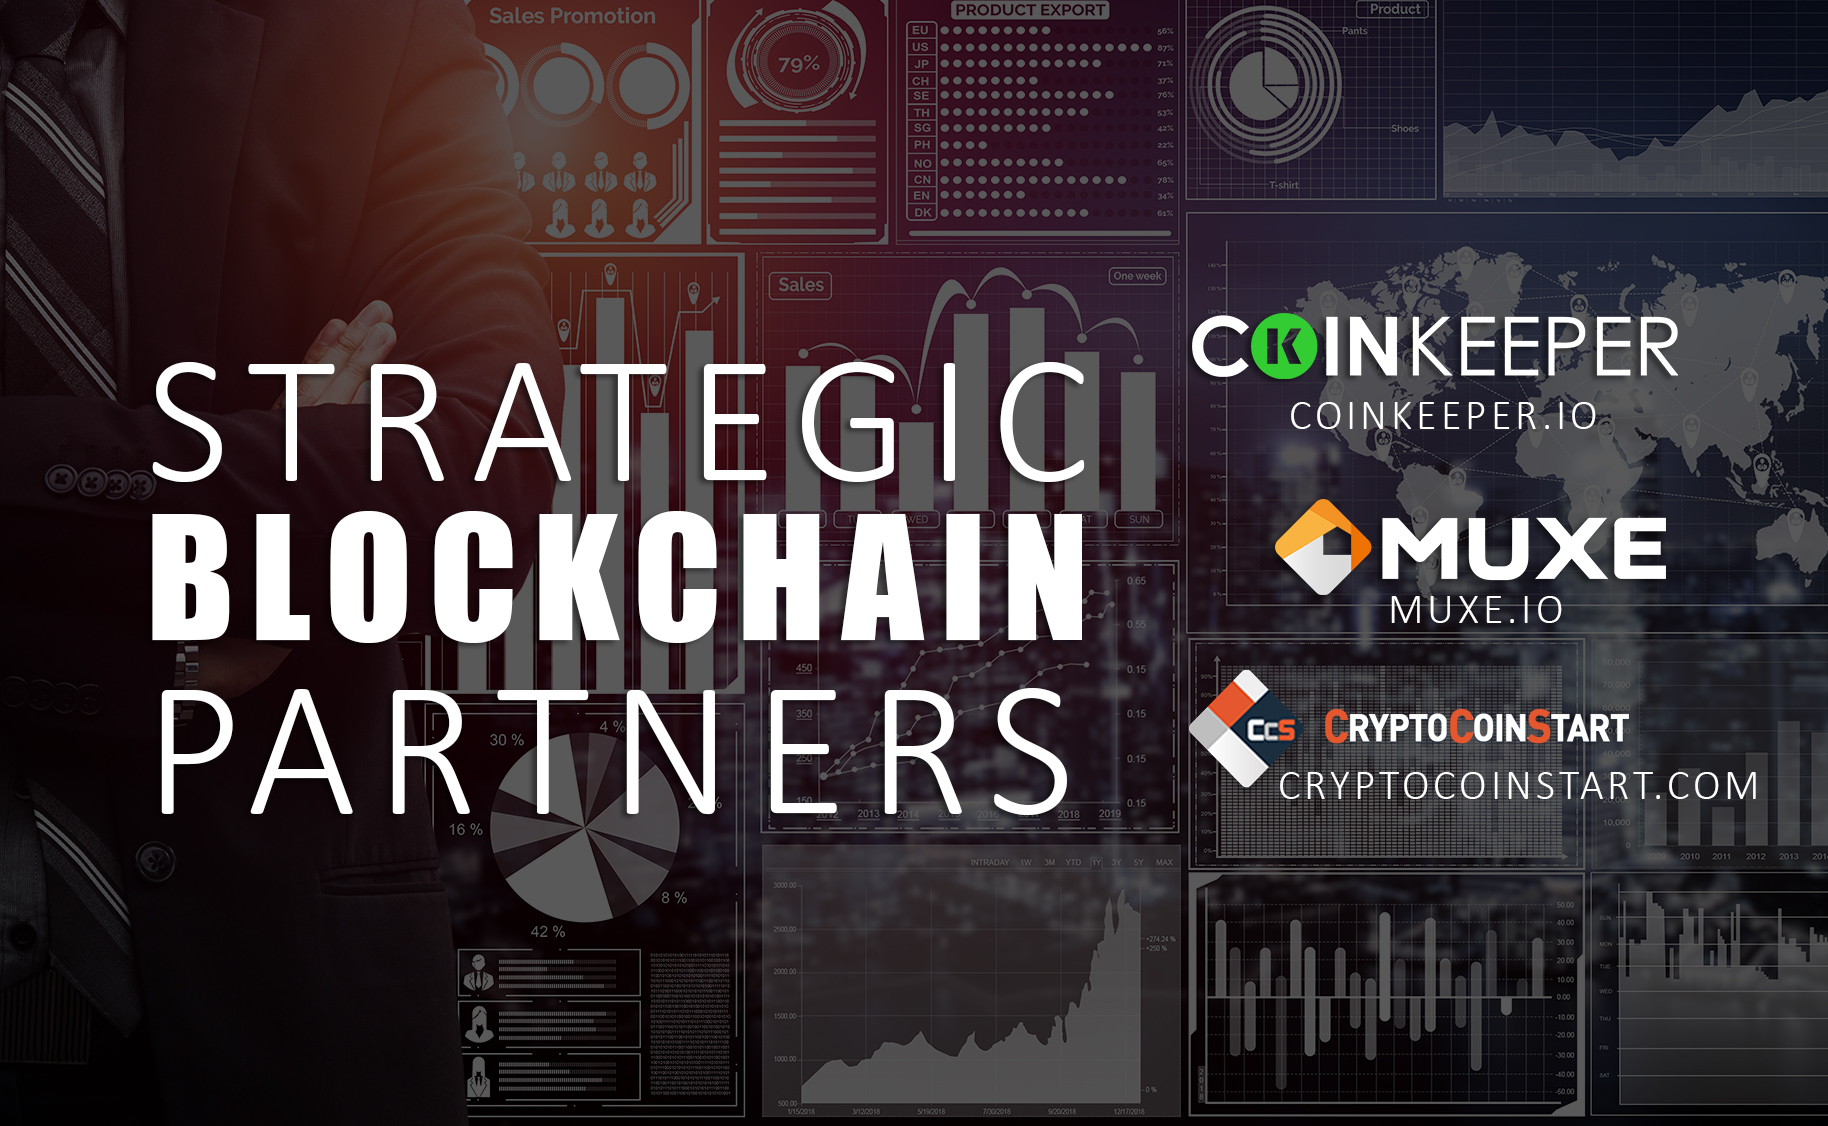 MUXE, CRYPTOCOINSTART AND COINKEEPER COLLABORATION